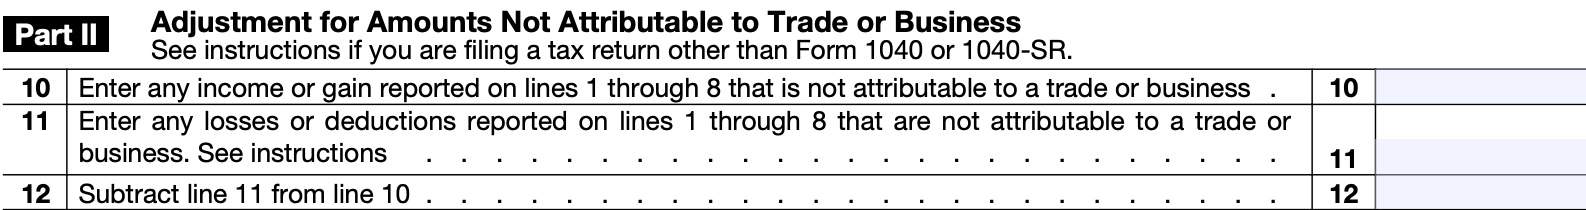 part ii: adjustment for amounts not attributable to trade or business